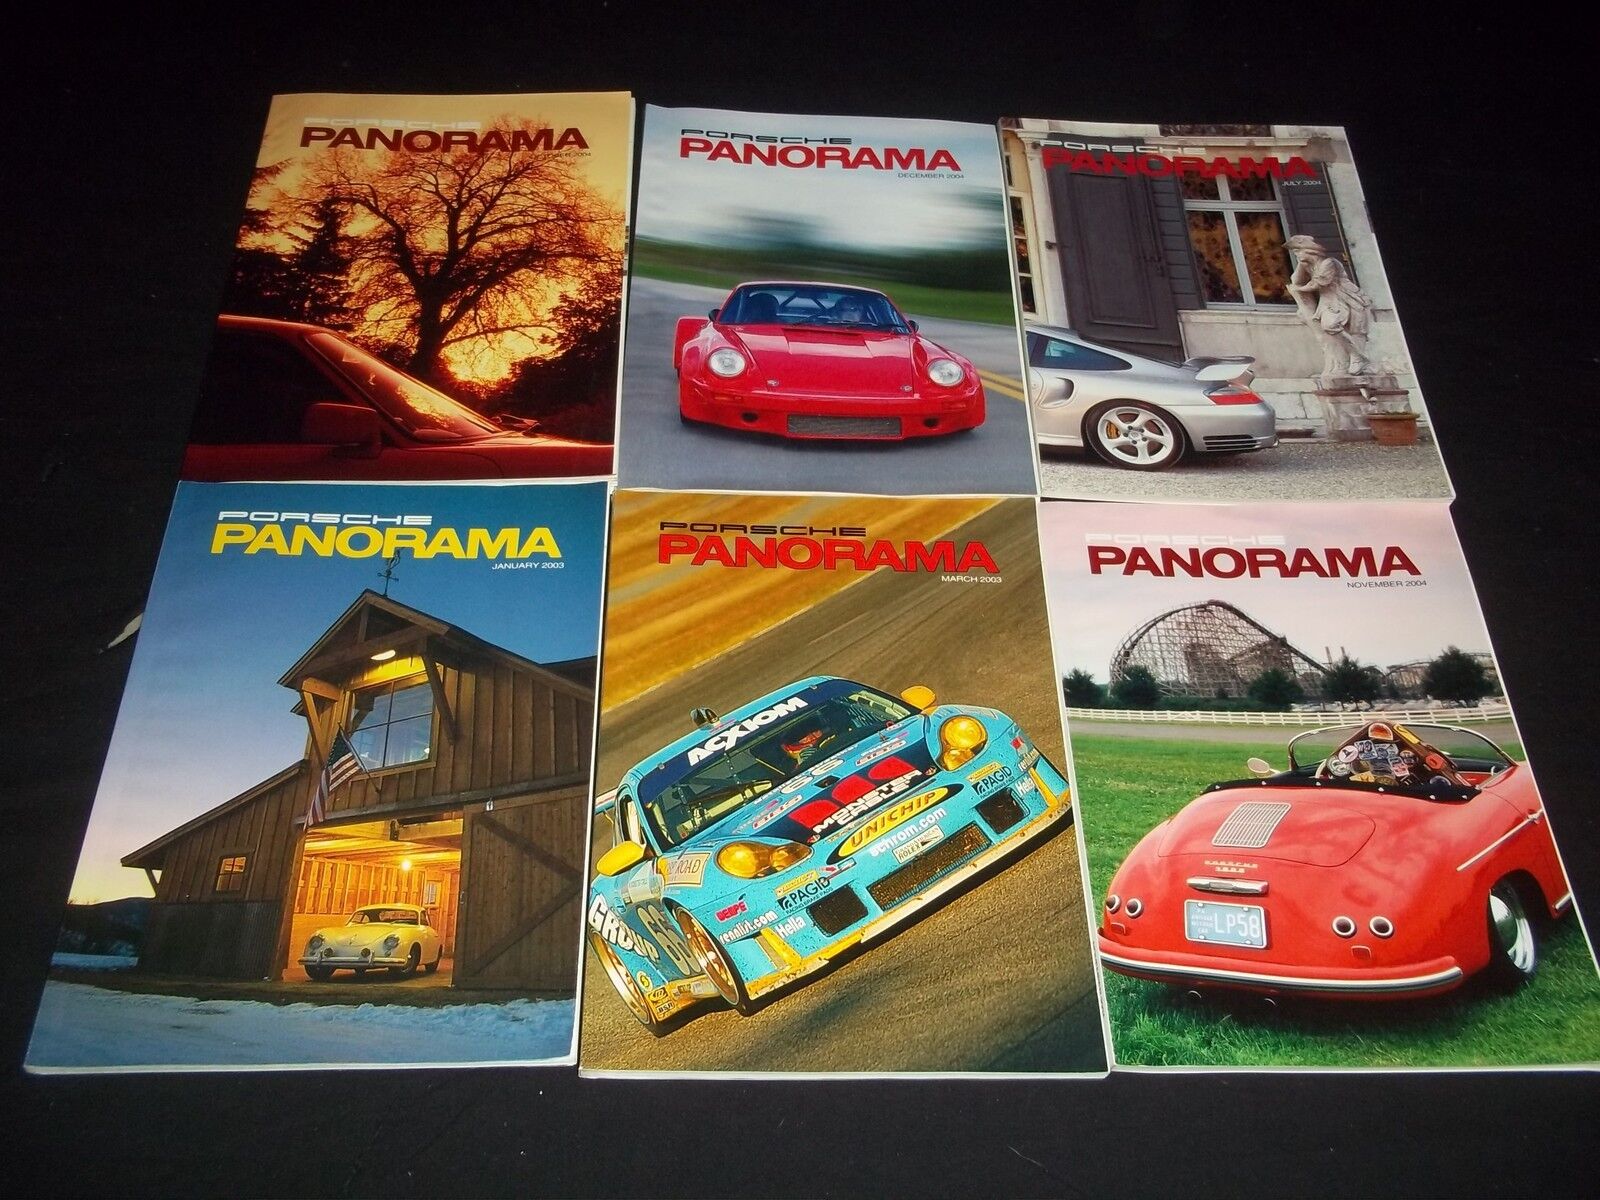 2003-2004 PORSCHE PANORAMA MAGAZINE LOT OF 6 ISSUES - FAST CAR ISSUES - M 521